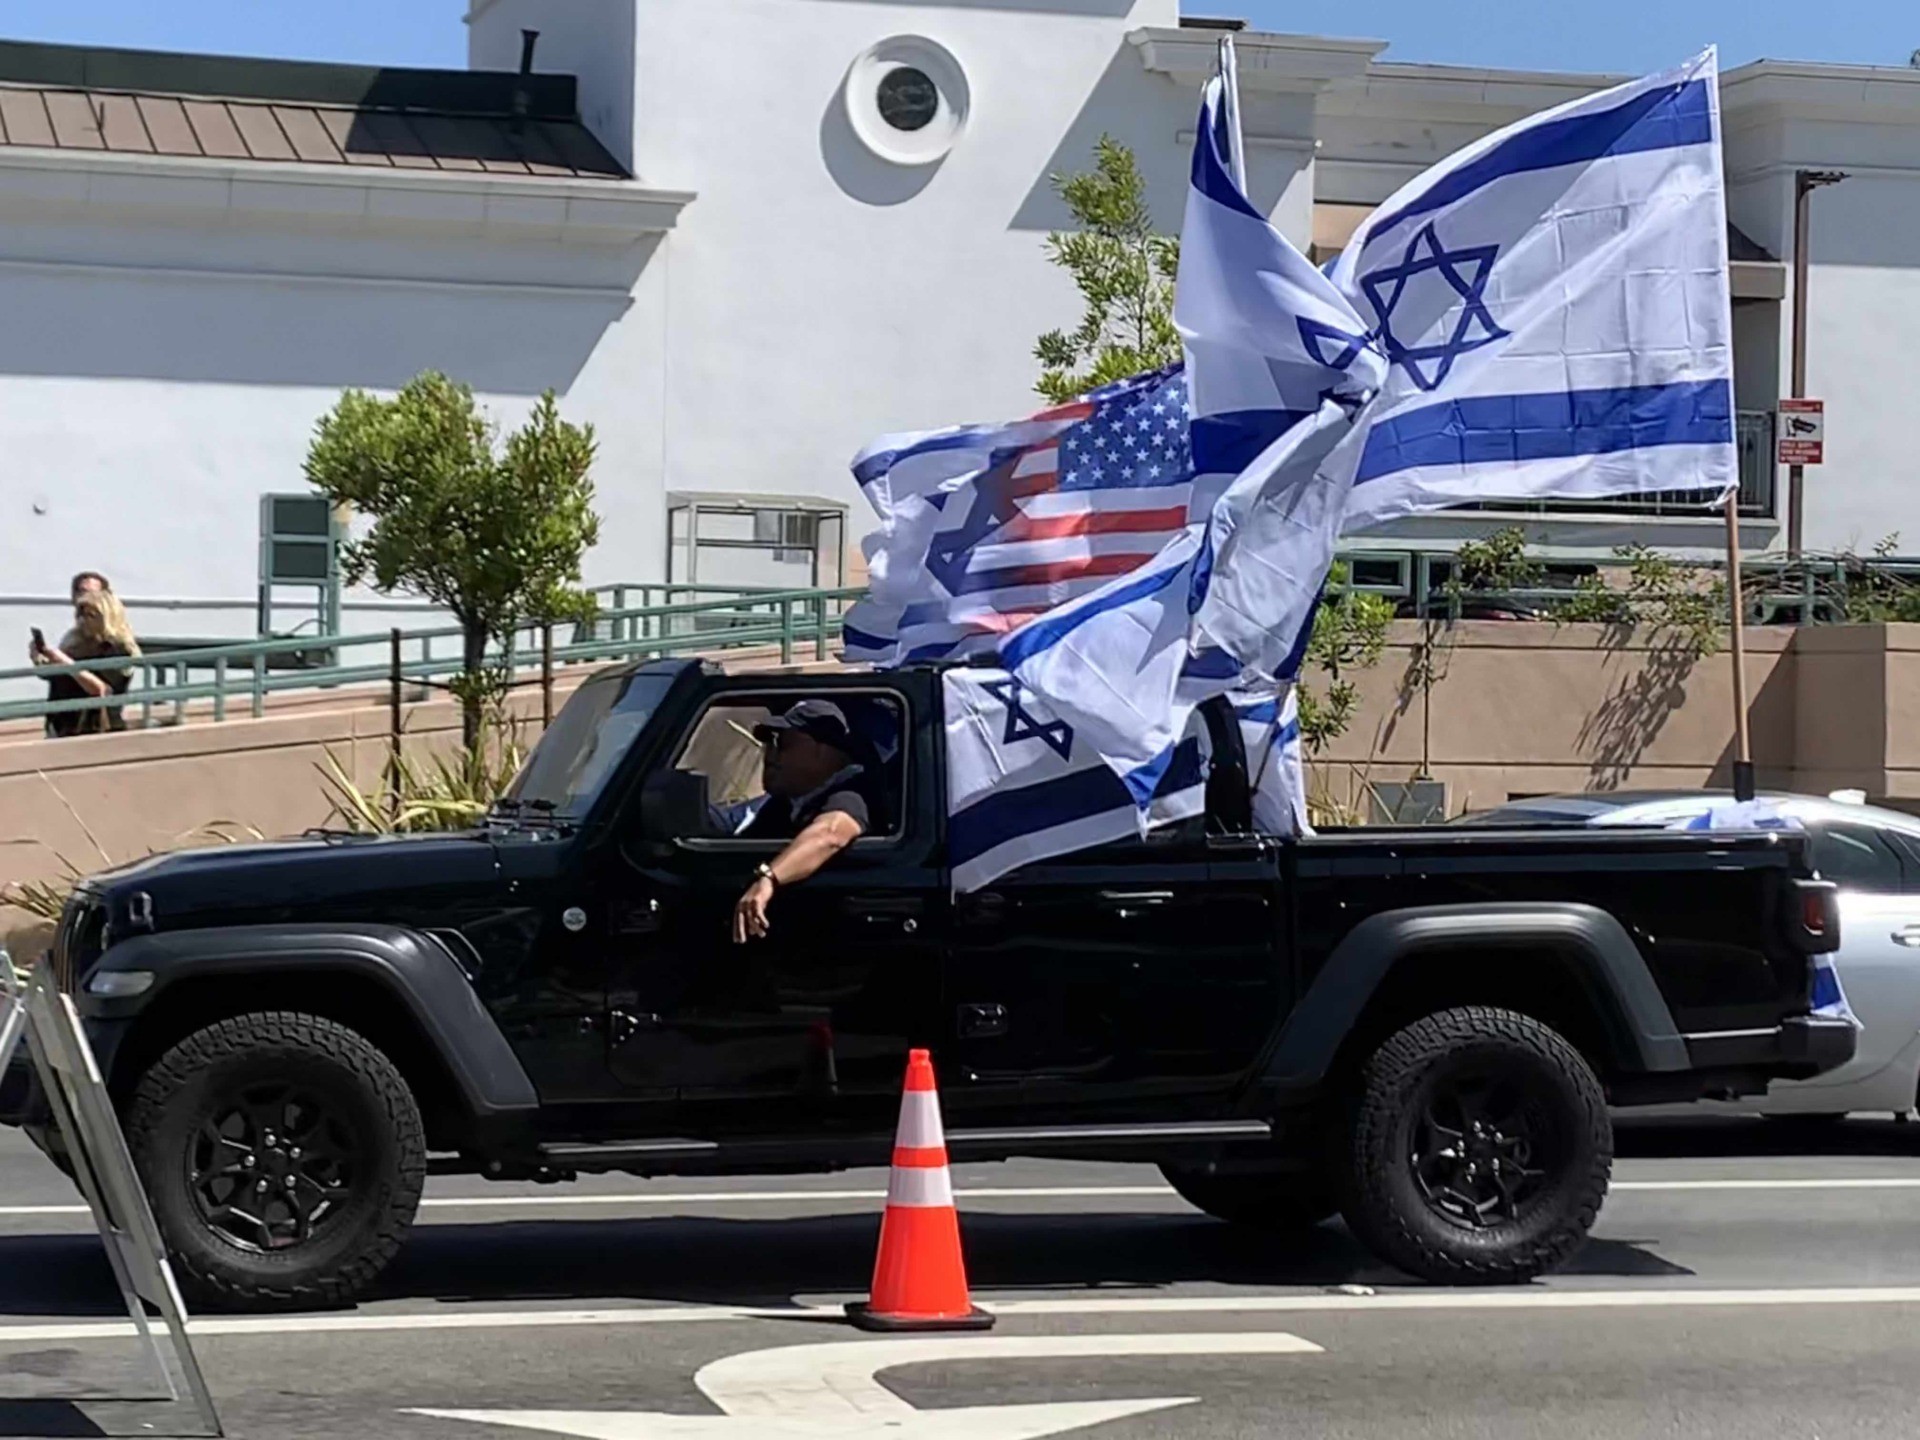 Truck and flags at Pro-Israel rally (Joel Pollak)